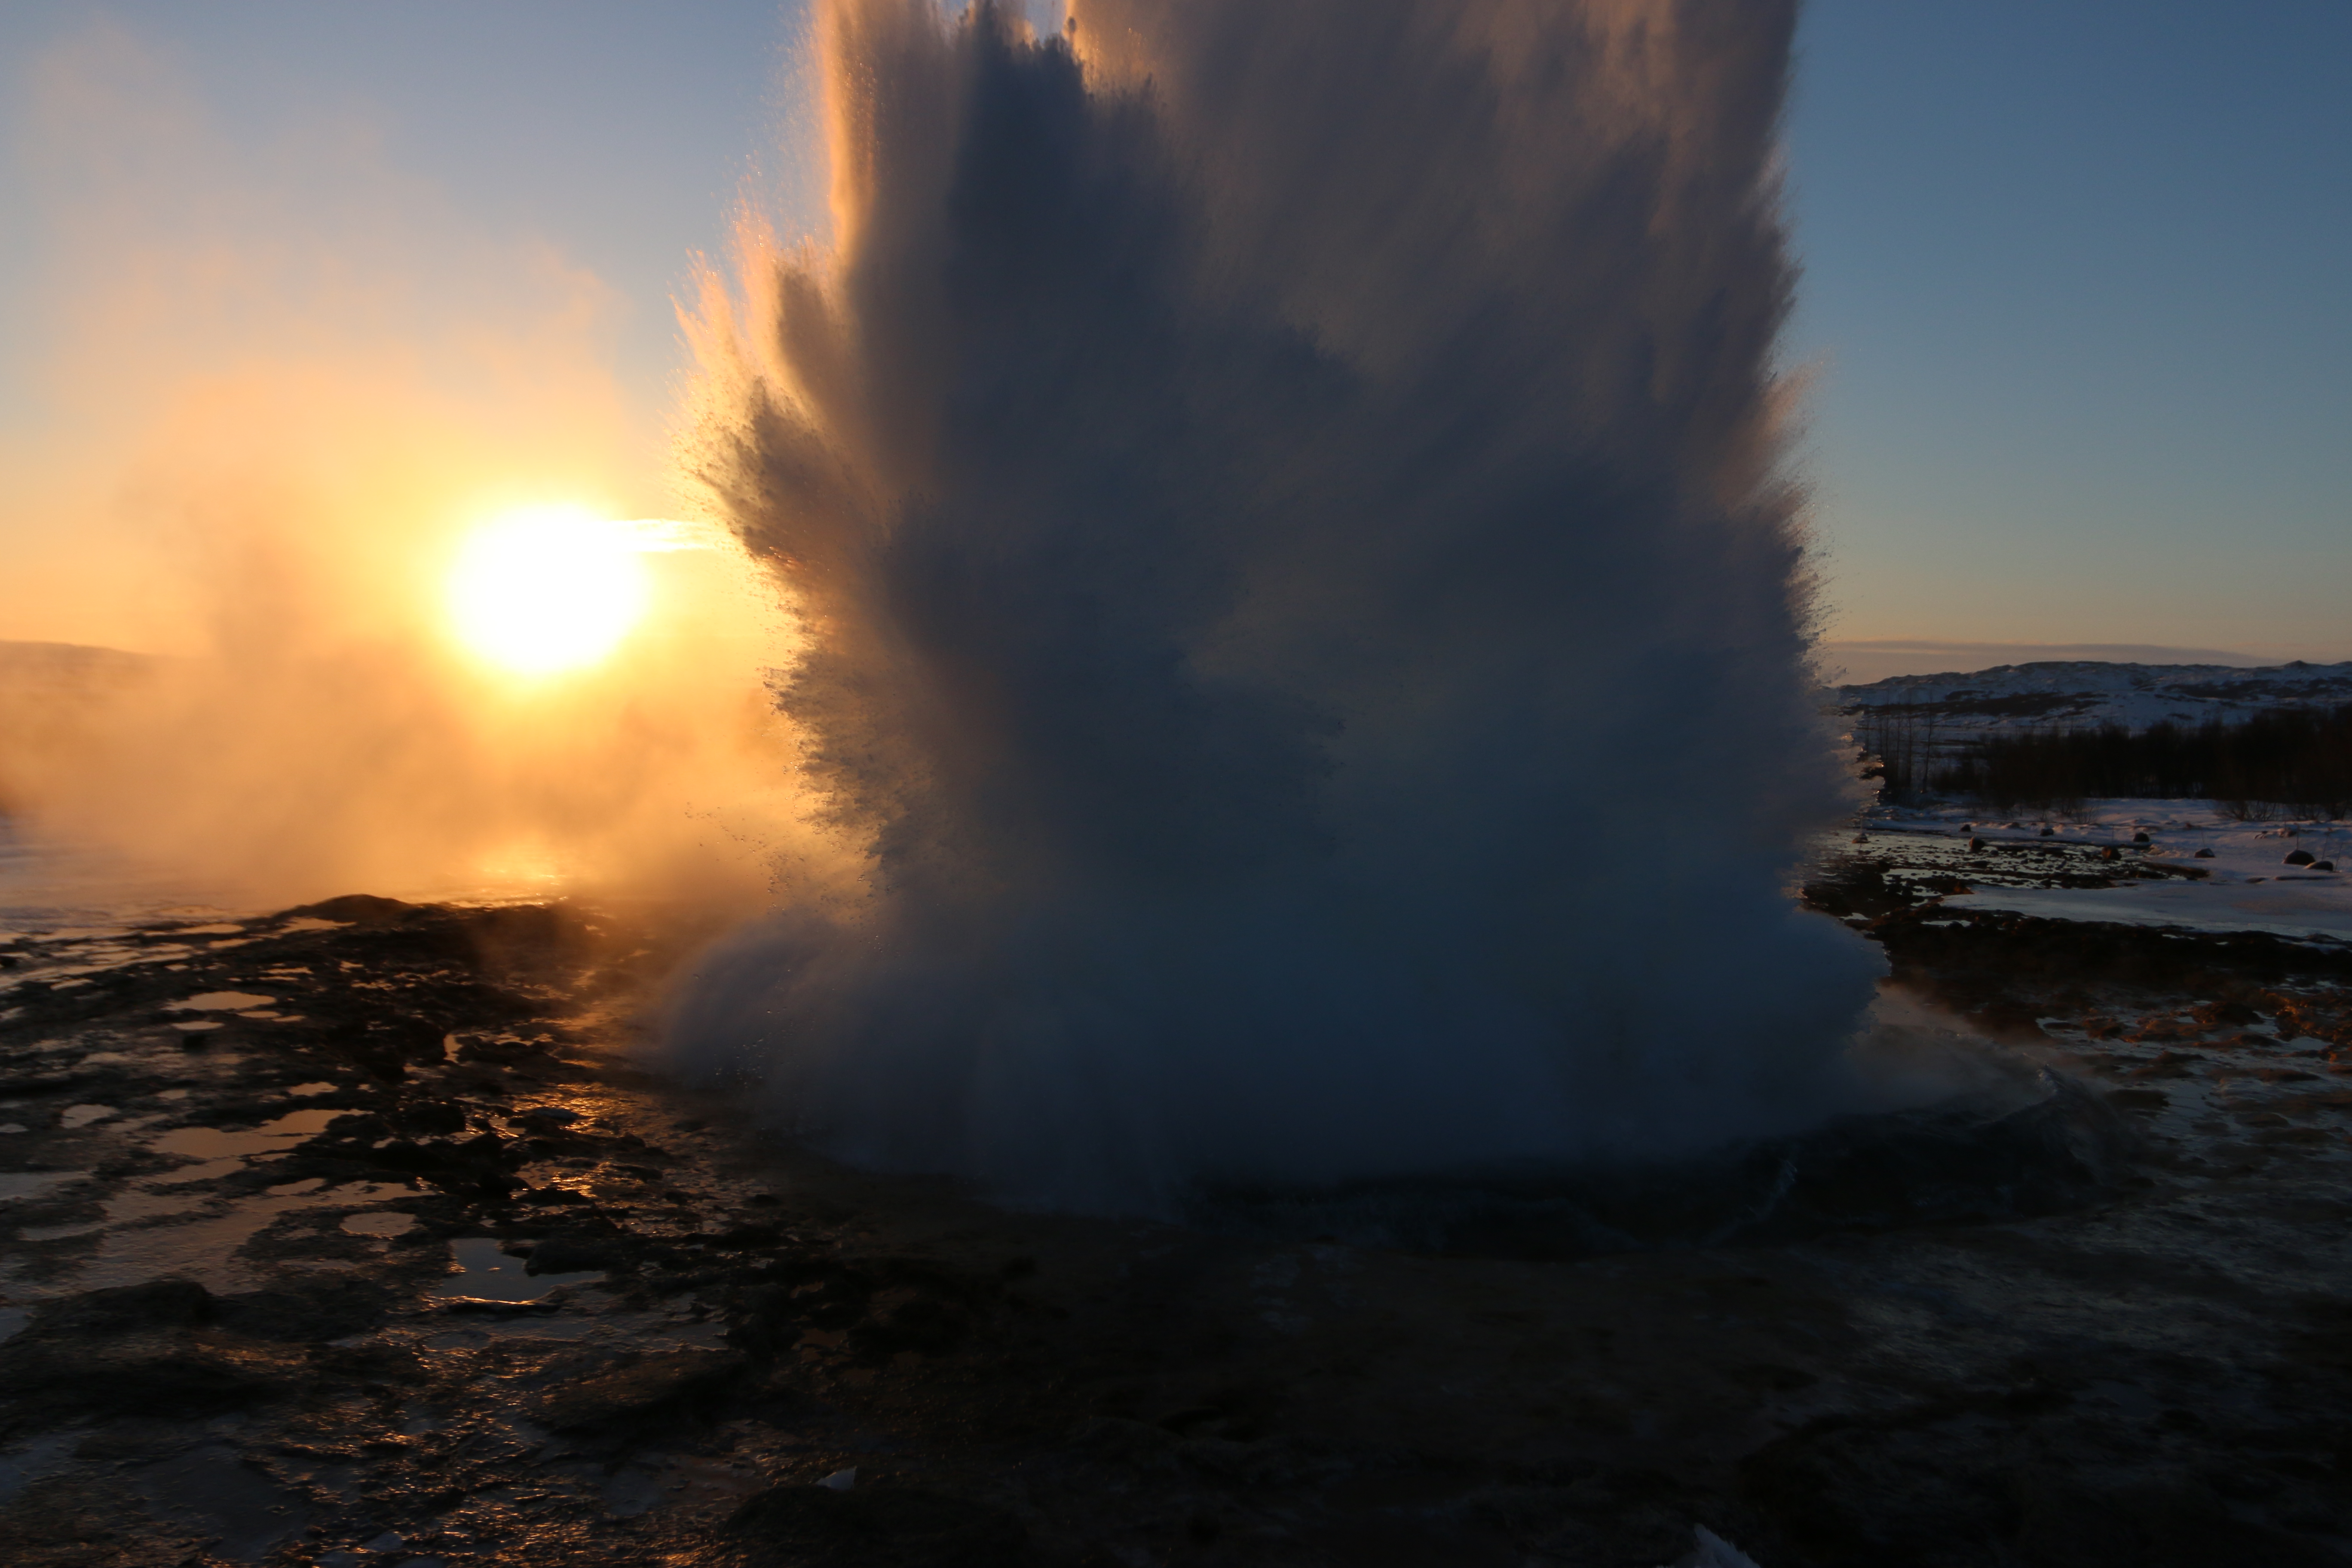 Geysir exploding in front of Iceland's perfect, if ephemeral, golden winter sun.